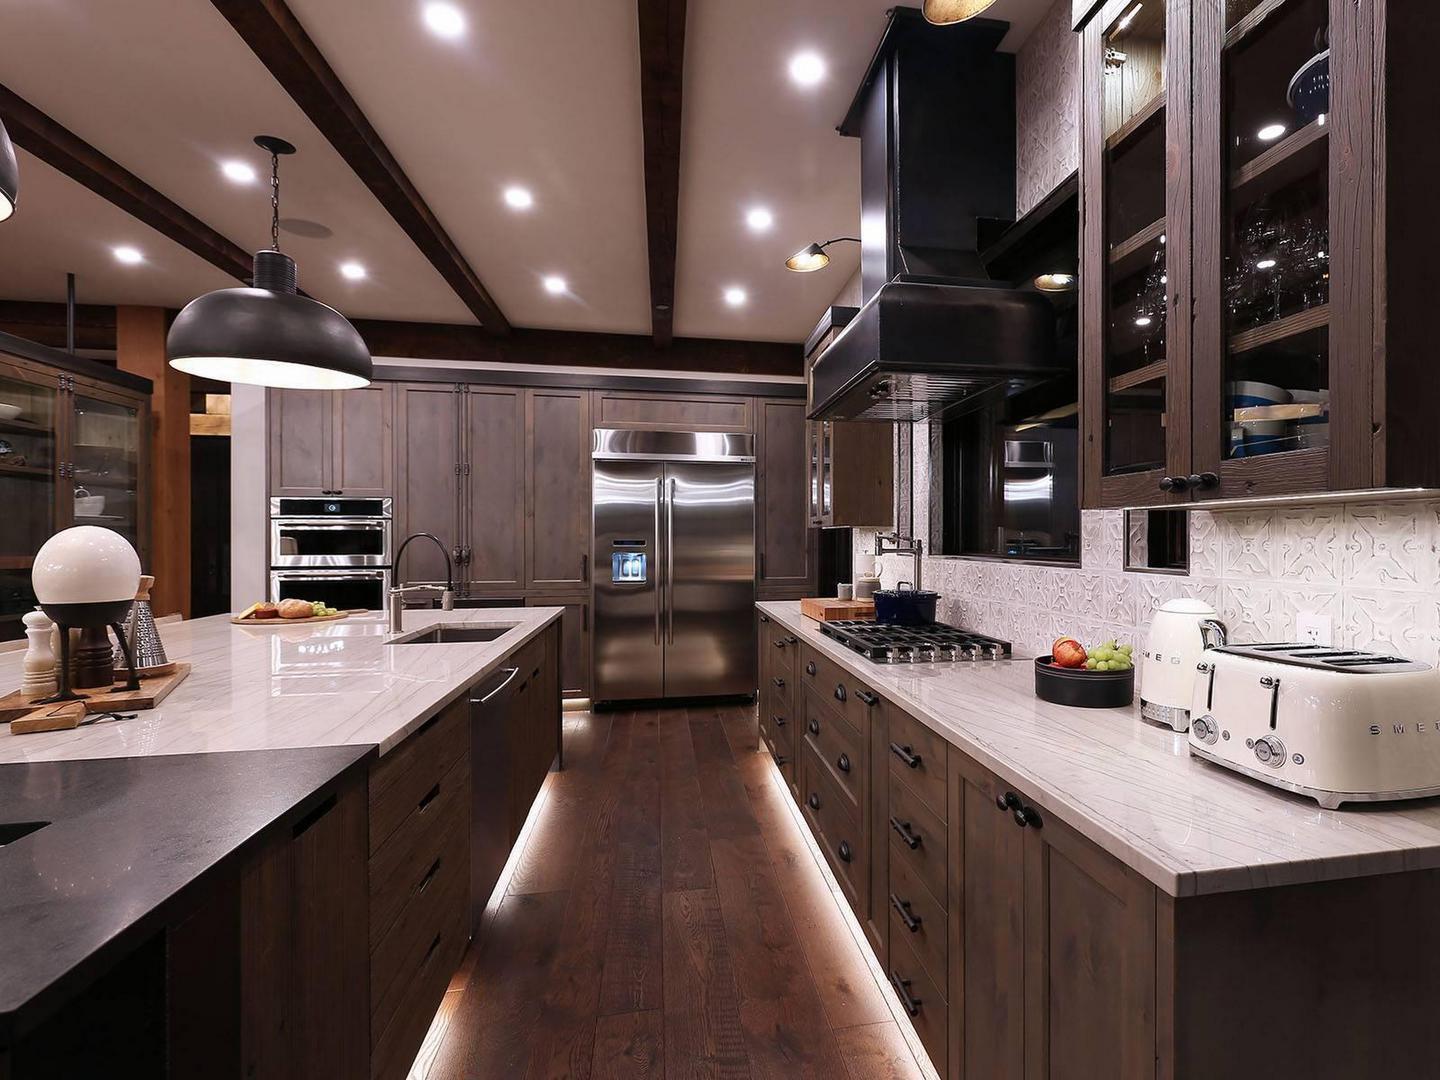 Snowpeaks Lodge's luxury modern gourmet kitchen with highend finishes, dark wooden cabinets and floors, and bright lighting, managed by Luxury Mountain Vacation Rentals at Big White Ski Resort